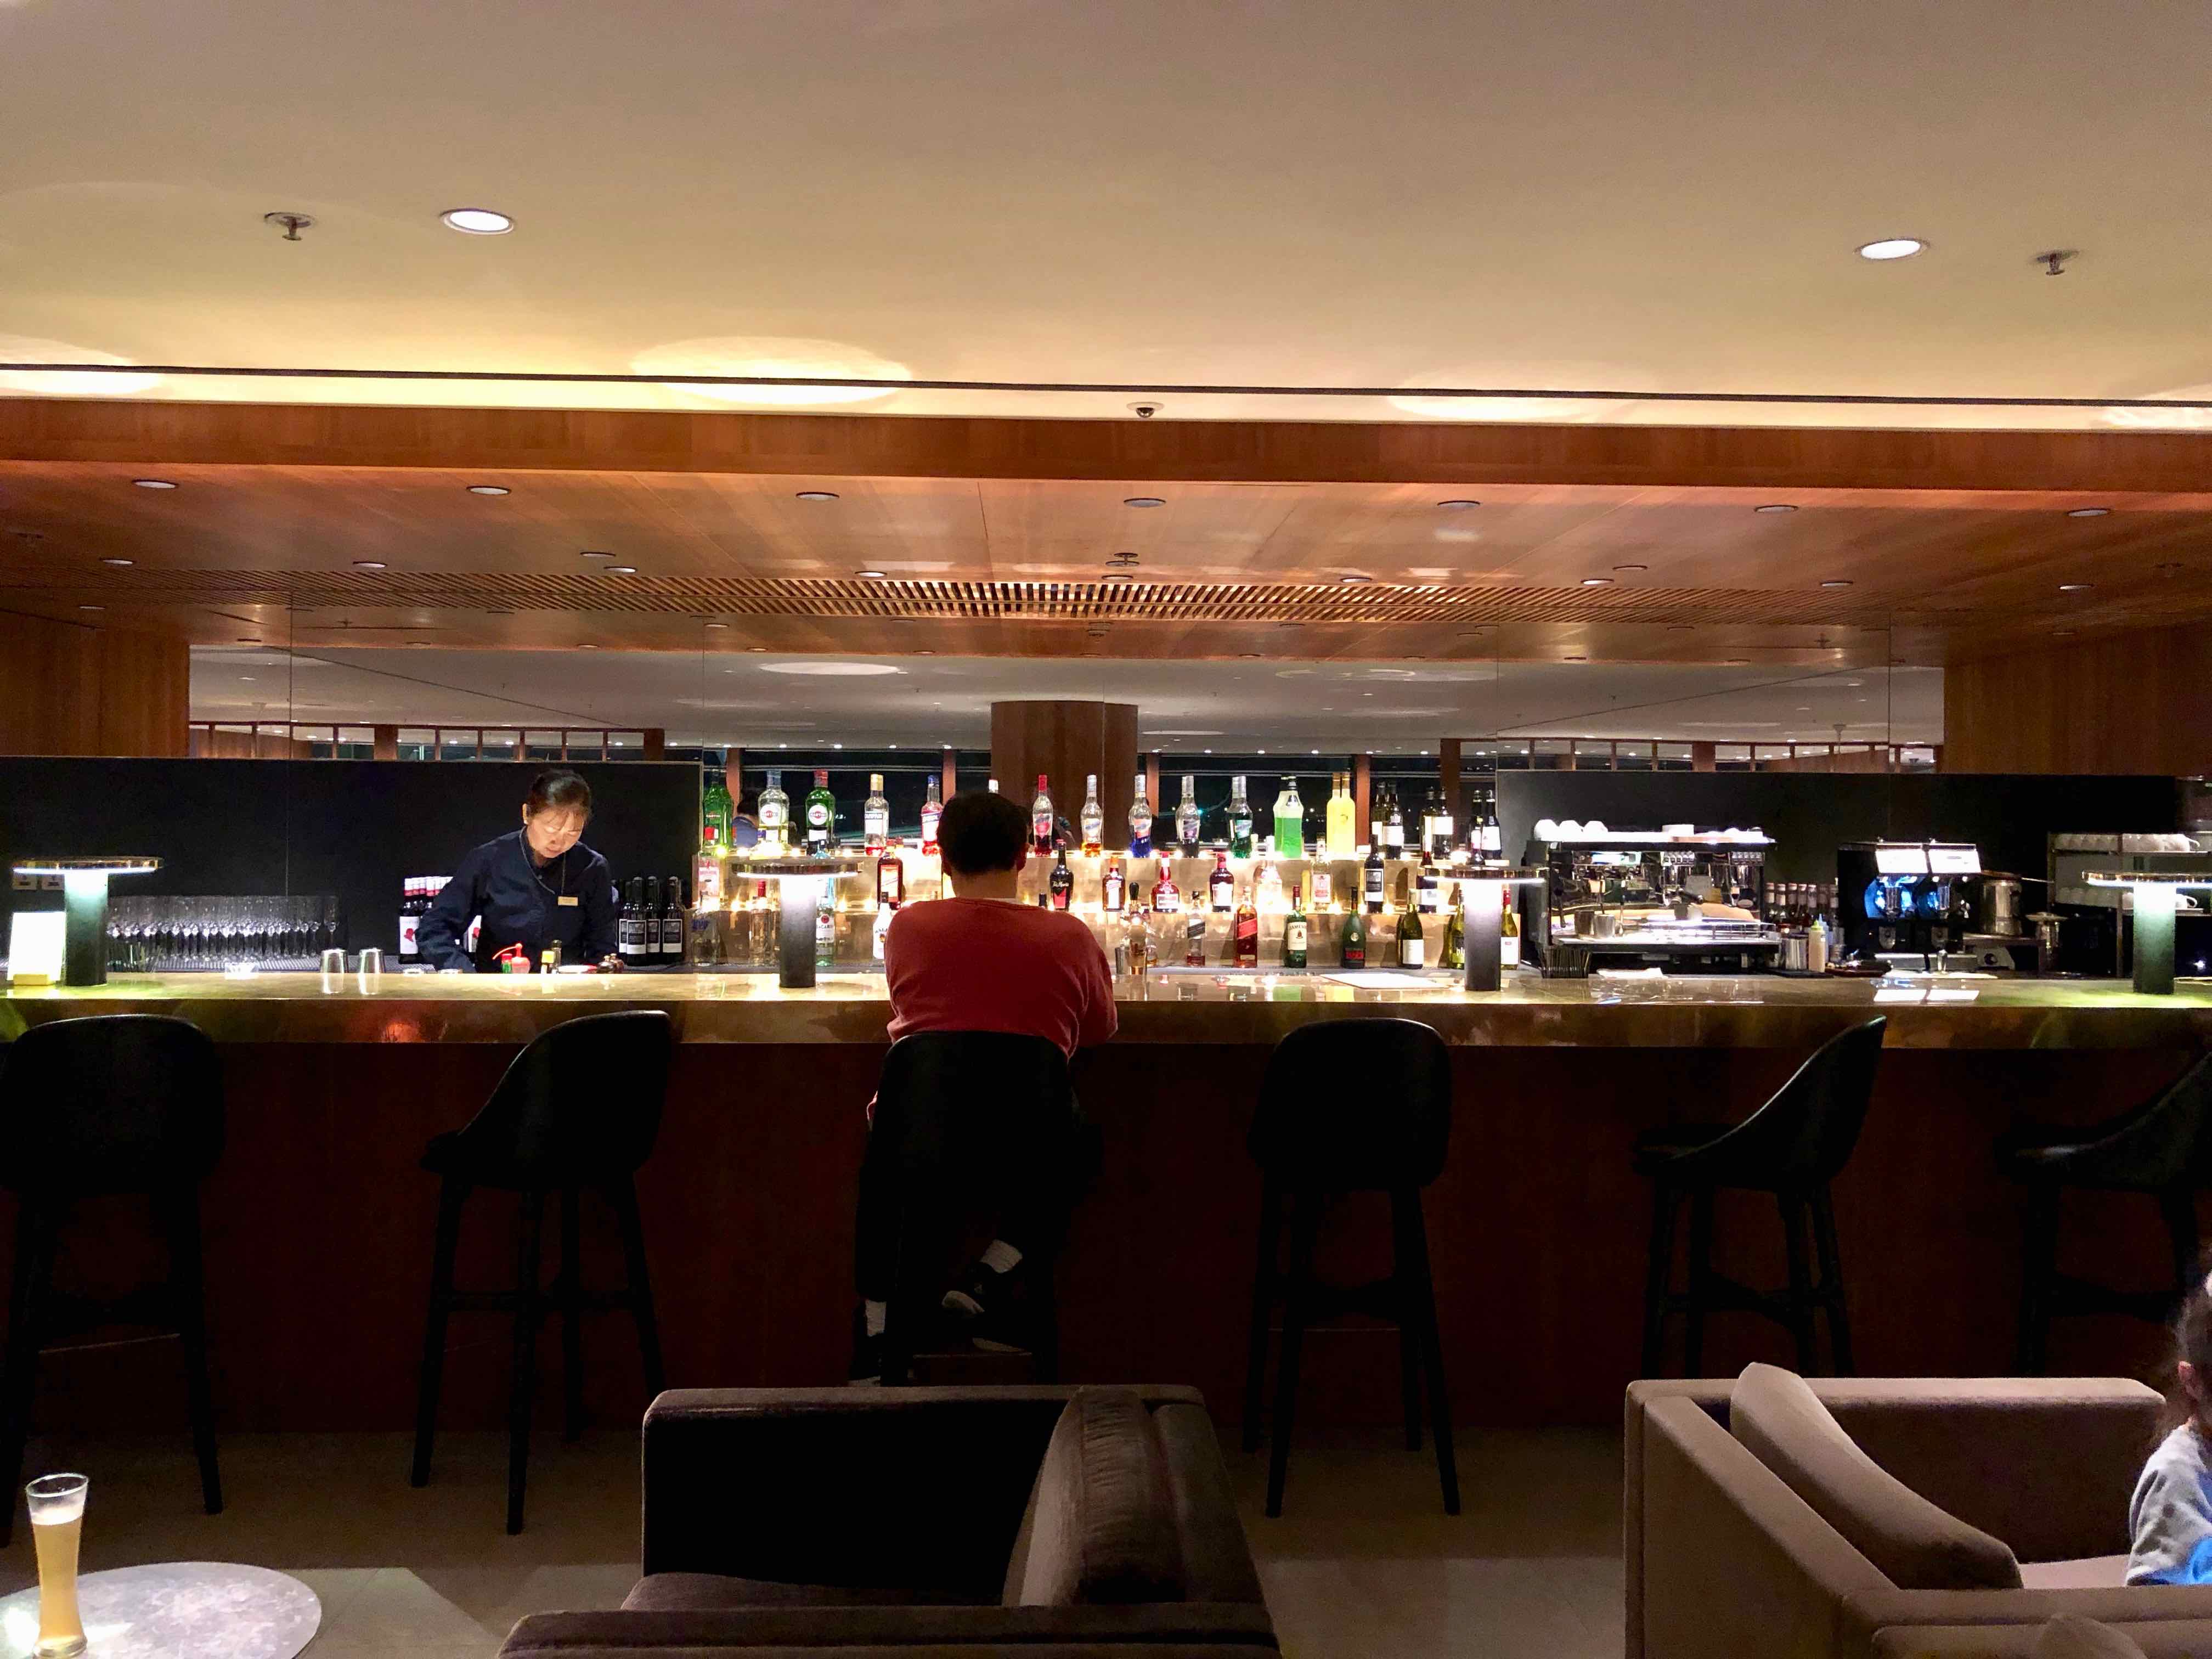 Cathay Pacific The Pier Business Class Lounge Hong Kong bar